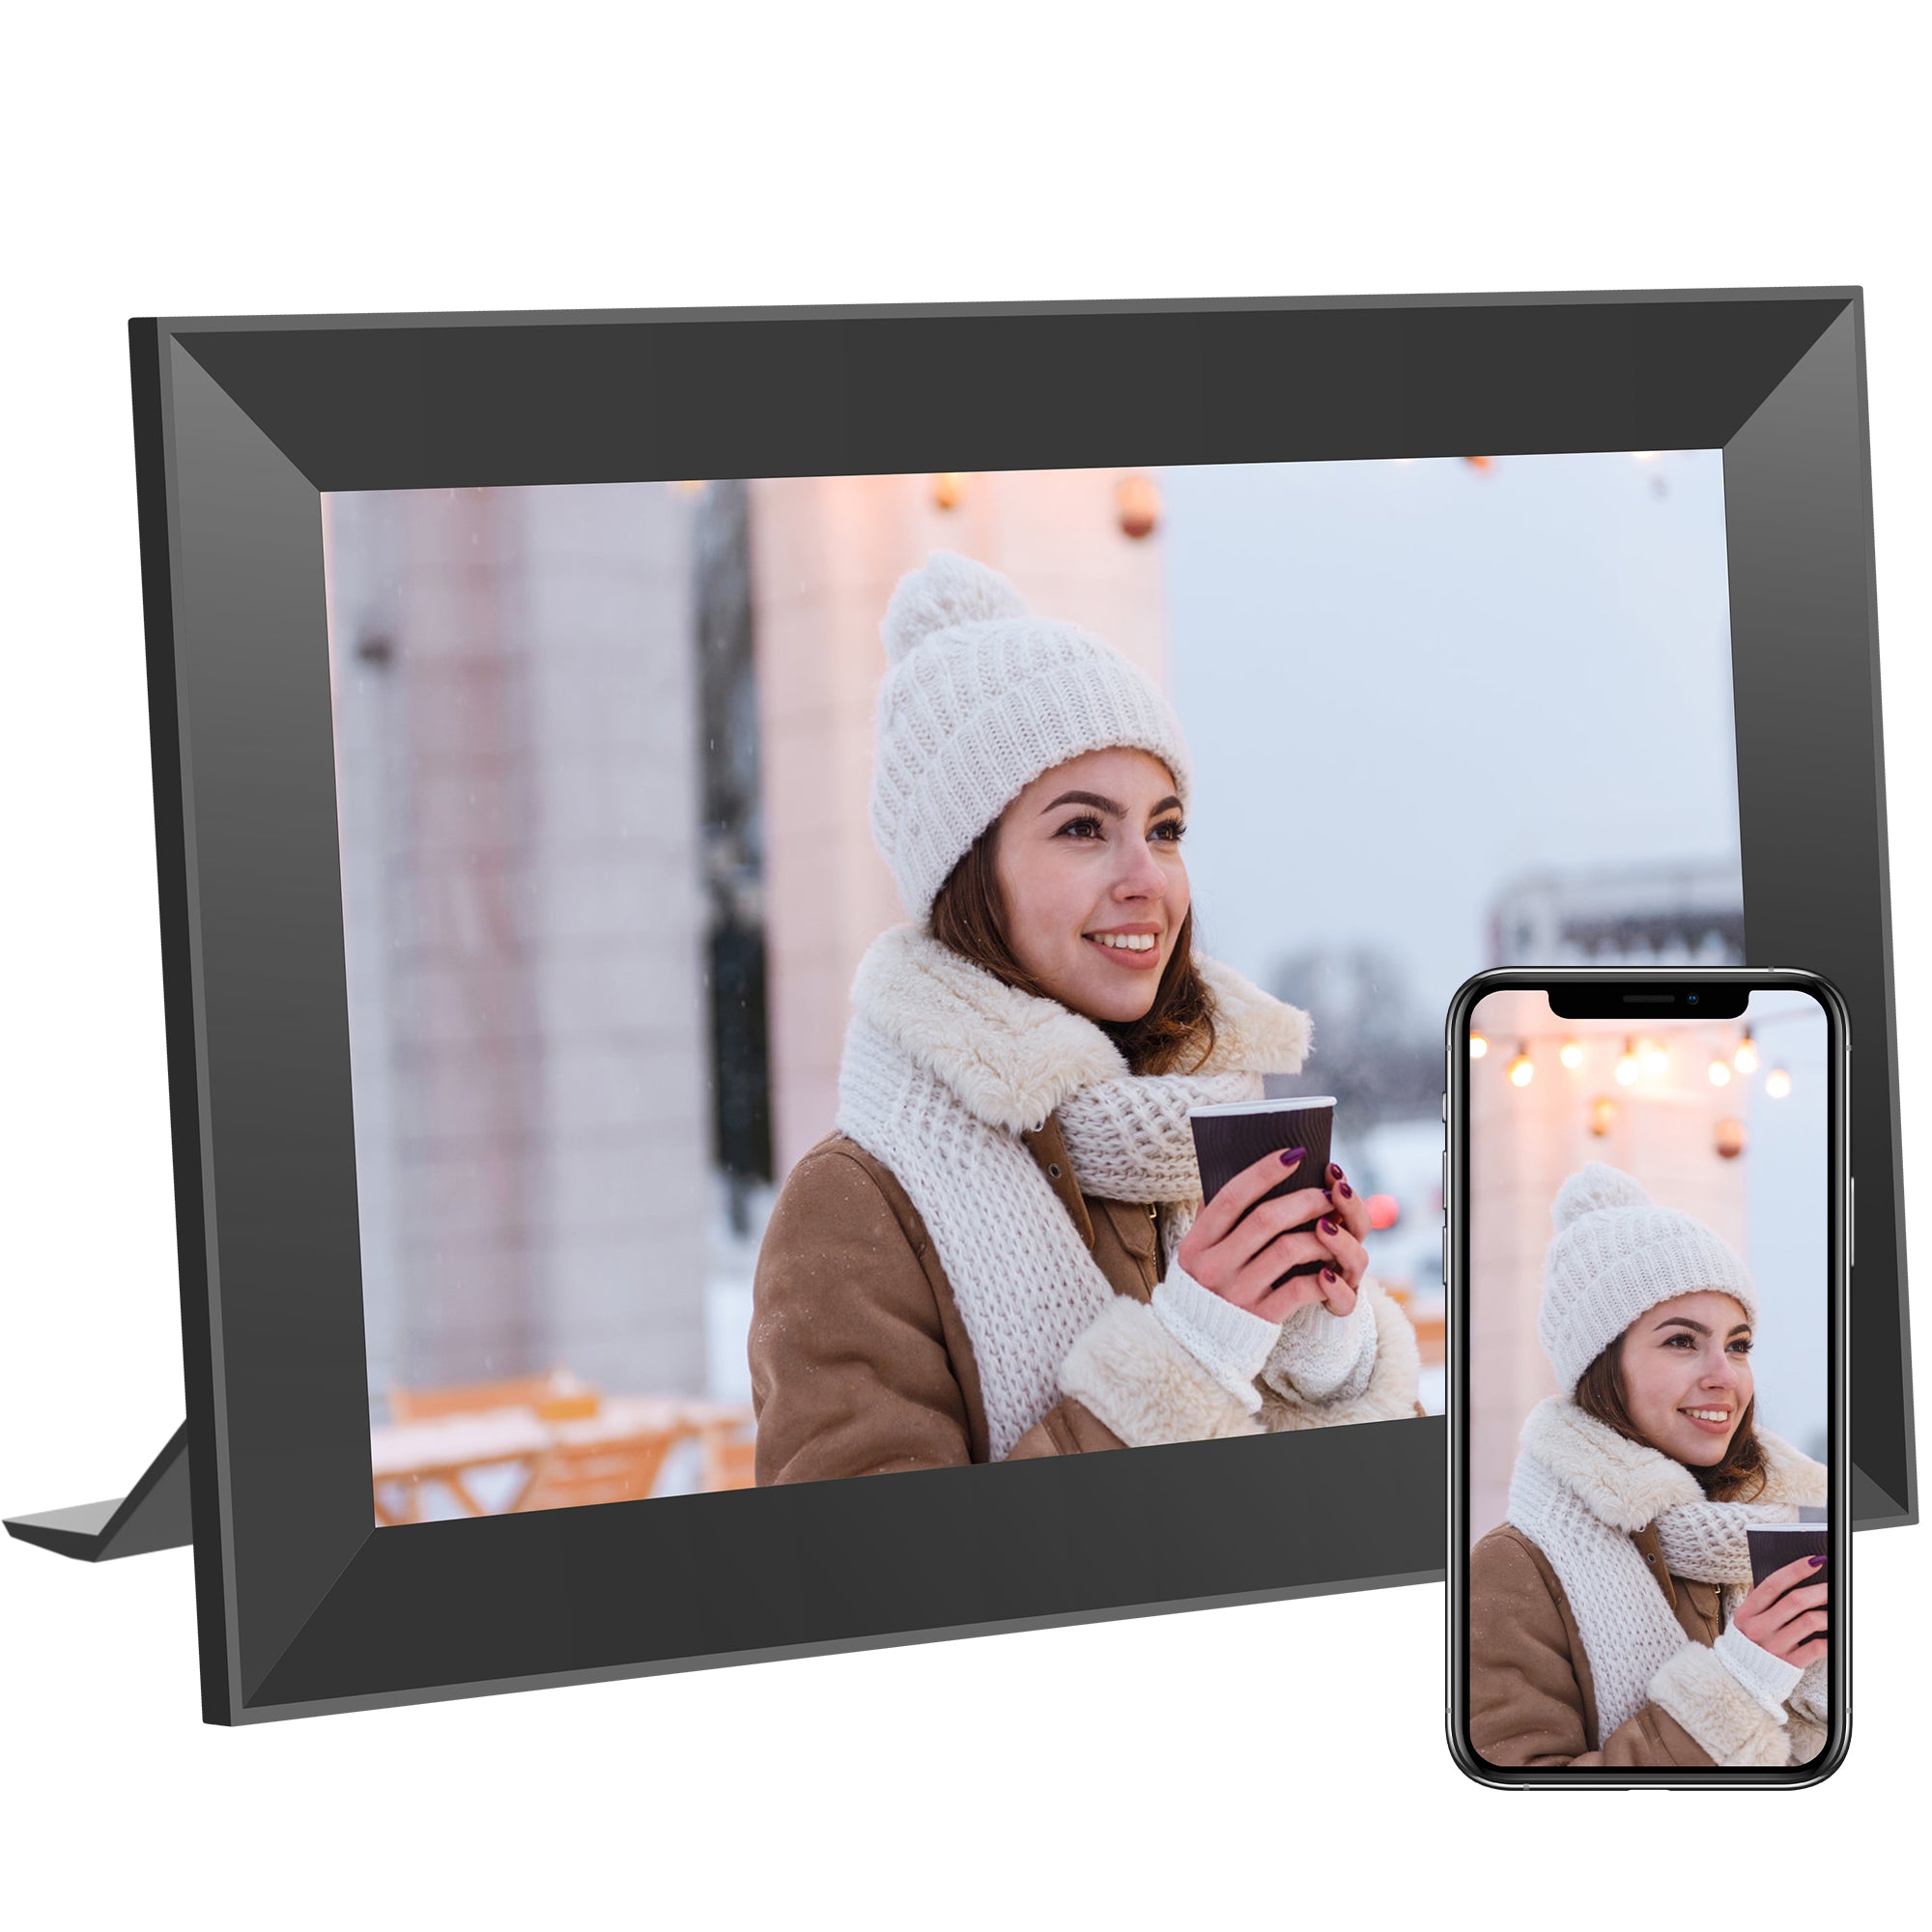 KODAK 10.1-inch Classic Digital Photo Frame CF102P, Wi-Fi Enabled, HD Touch-Screen Display with Automatic Rotation, Music, Video, Weather and Calendar